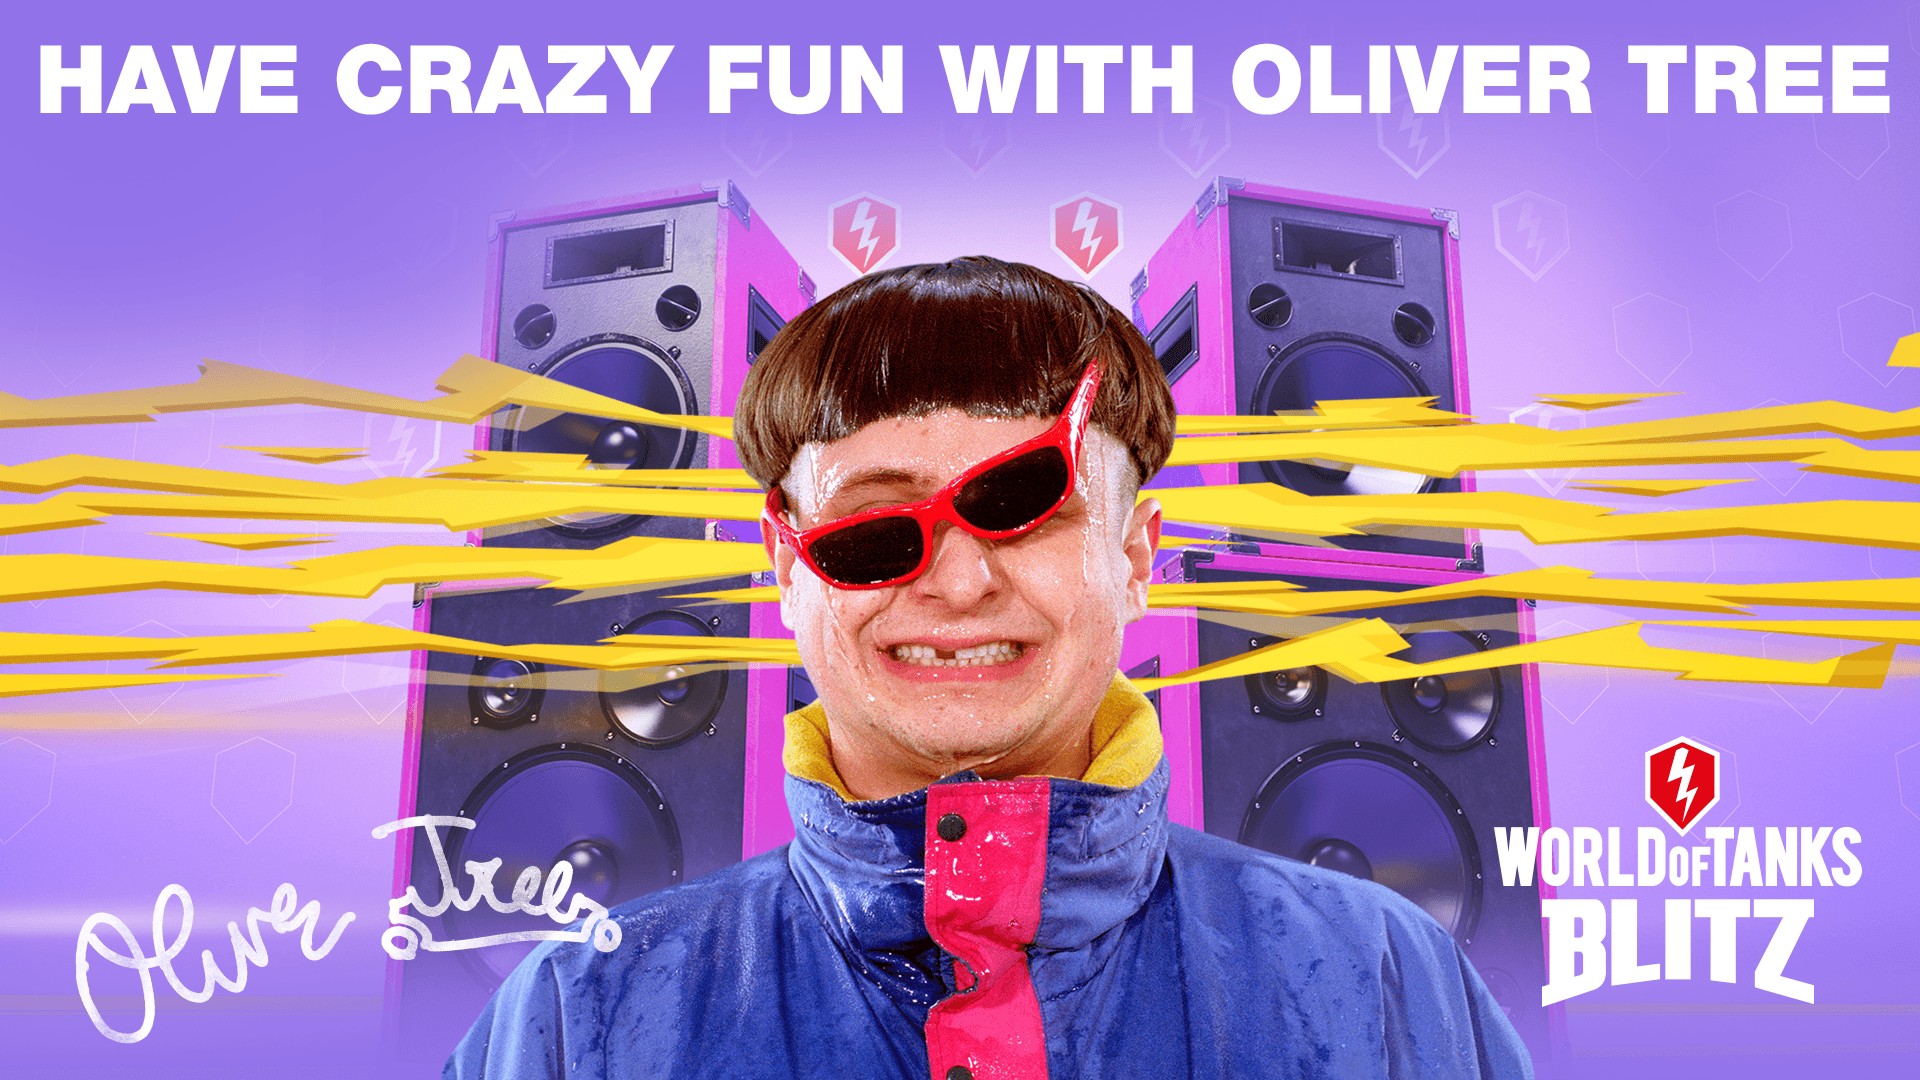 Come Party With Oliver Tree In World of Tanks Blitz